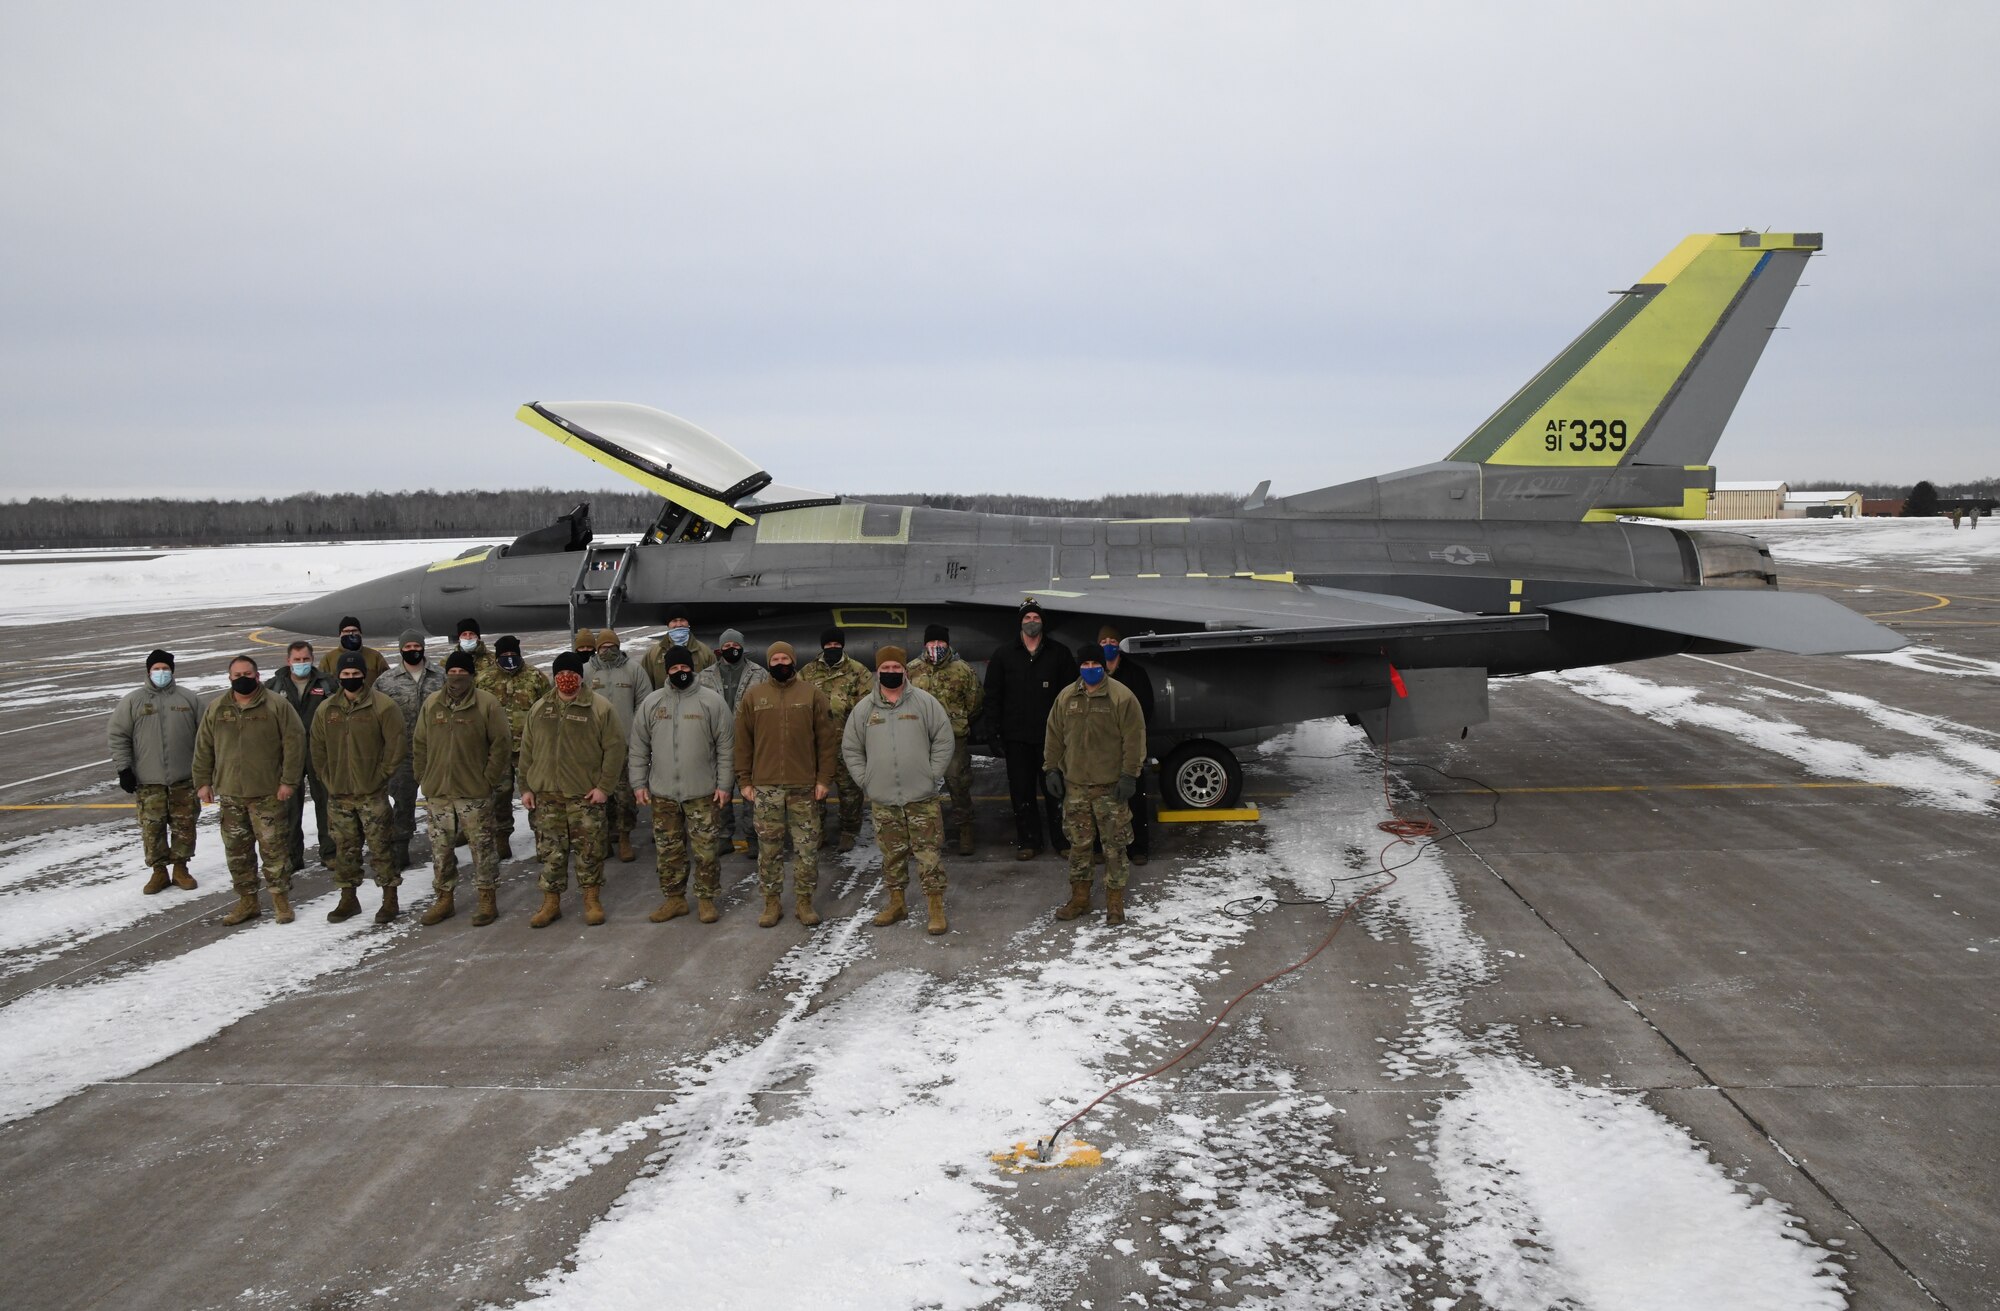 148th Maintenance Group personnel and Lt. Col. R. Matt Russell, Chief of F-16 Flight Tests and pilot for the F-16 System Program Office at Hill Air Force Base pose for a photo when aircraft 339, an F-16 that was severely battle damaged in 2018, was returned to the 148th Fighter Wing.